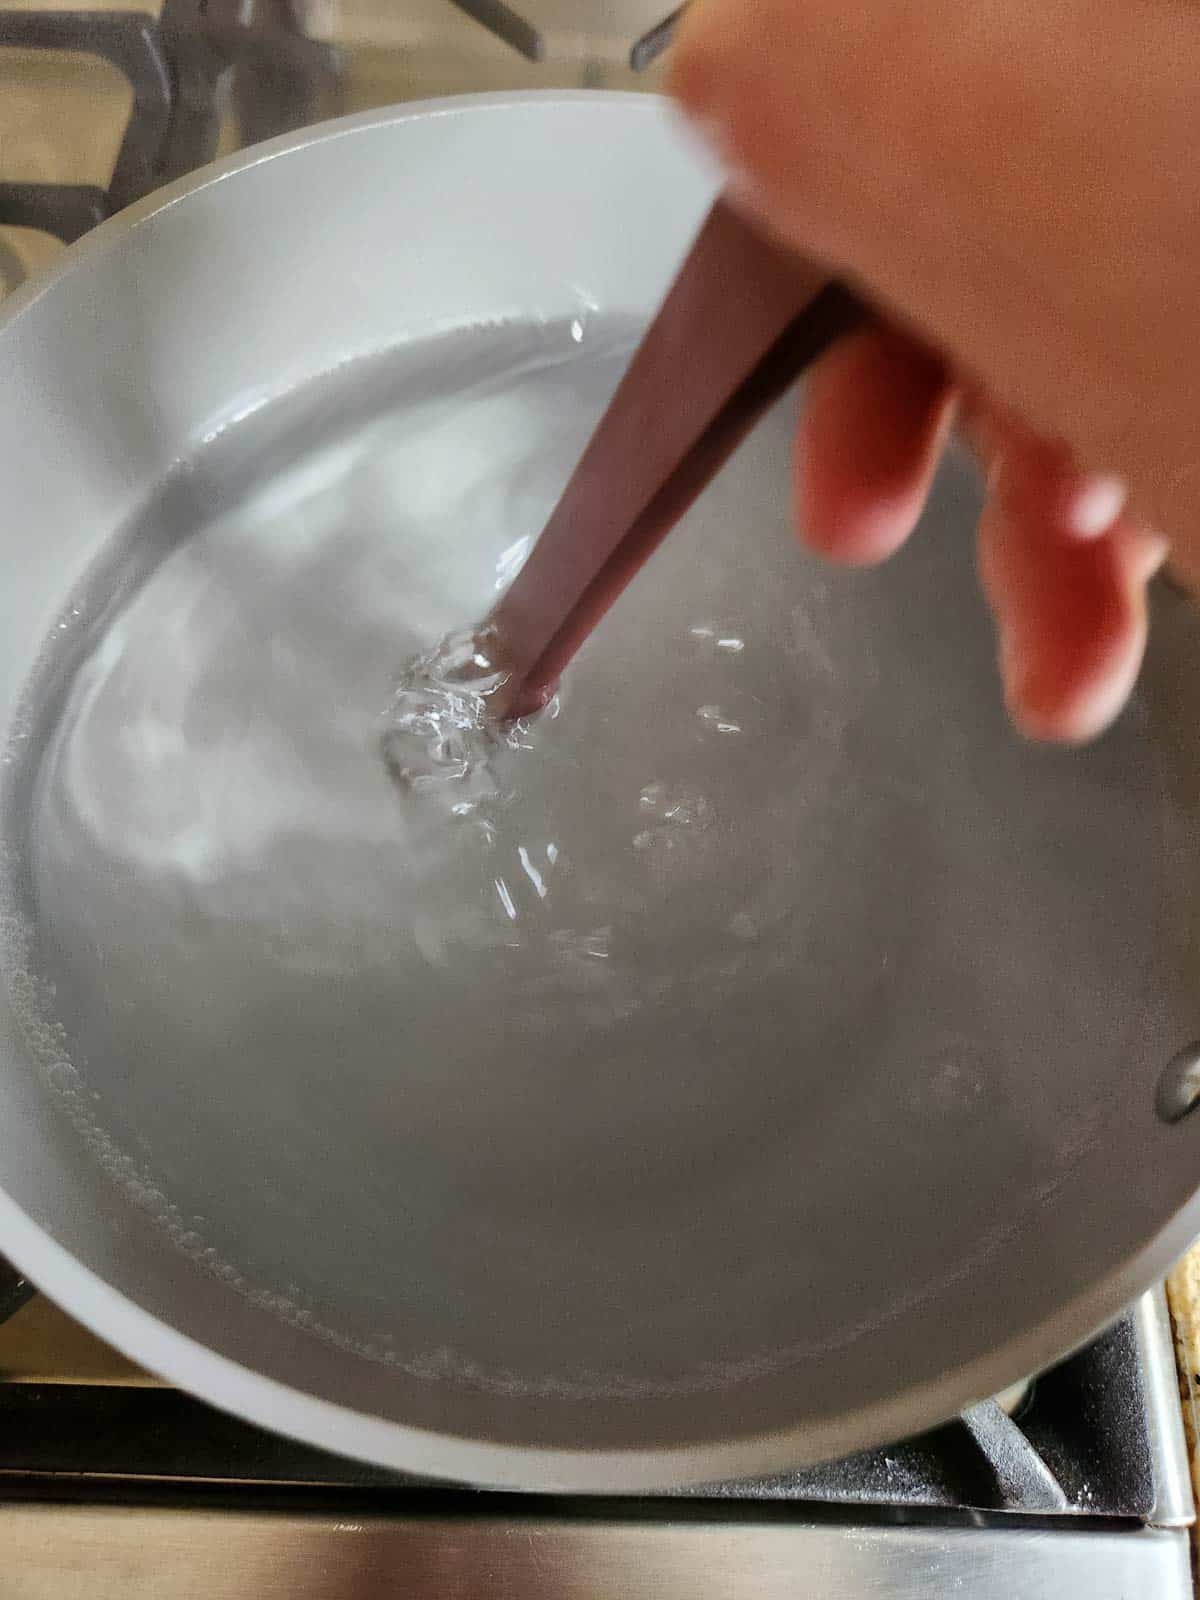 Pot of water being stirred on the stove.